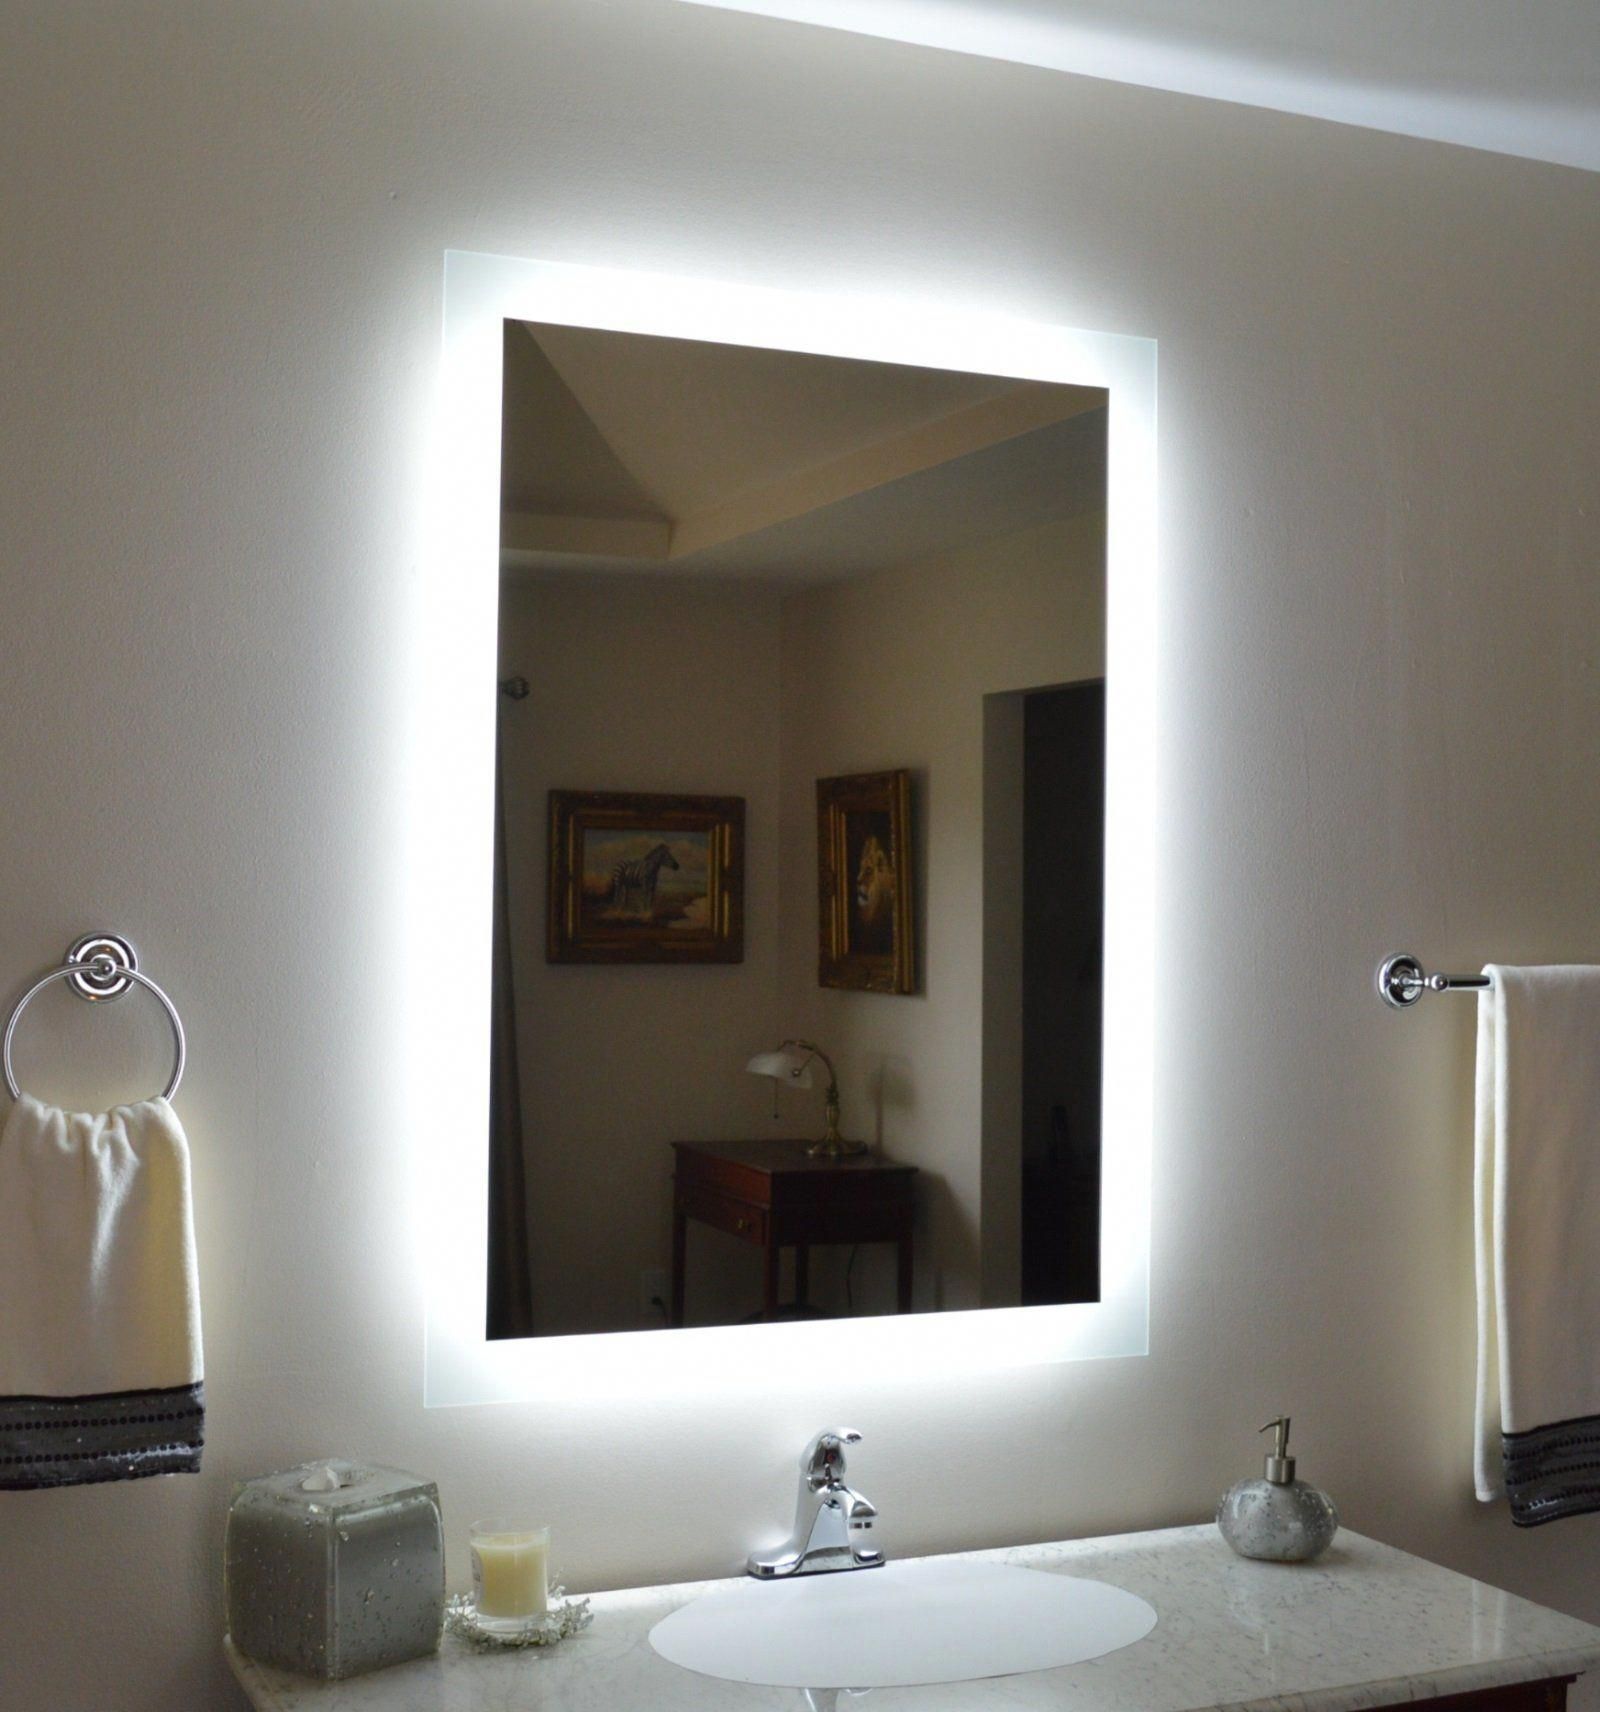 Side Lighted Led Bathroom Vanity Mirror: 32" X 44" – Rectangular – Wall Inside Back Lit Oval Led Wall Mirrors (View 2 of 15)